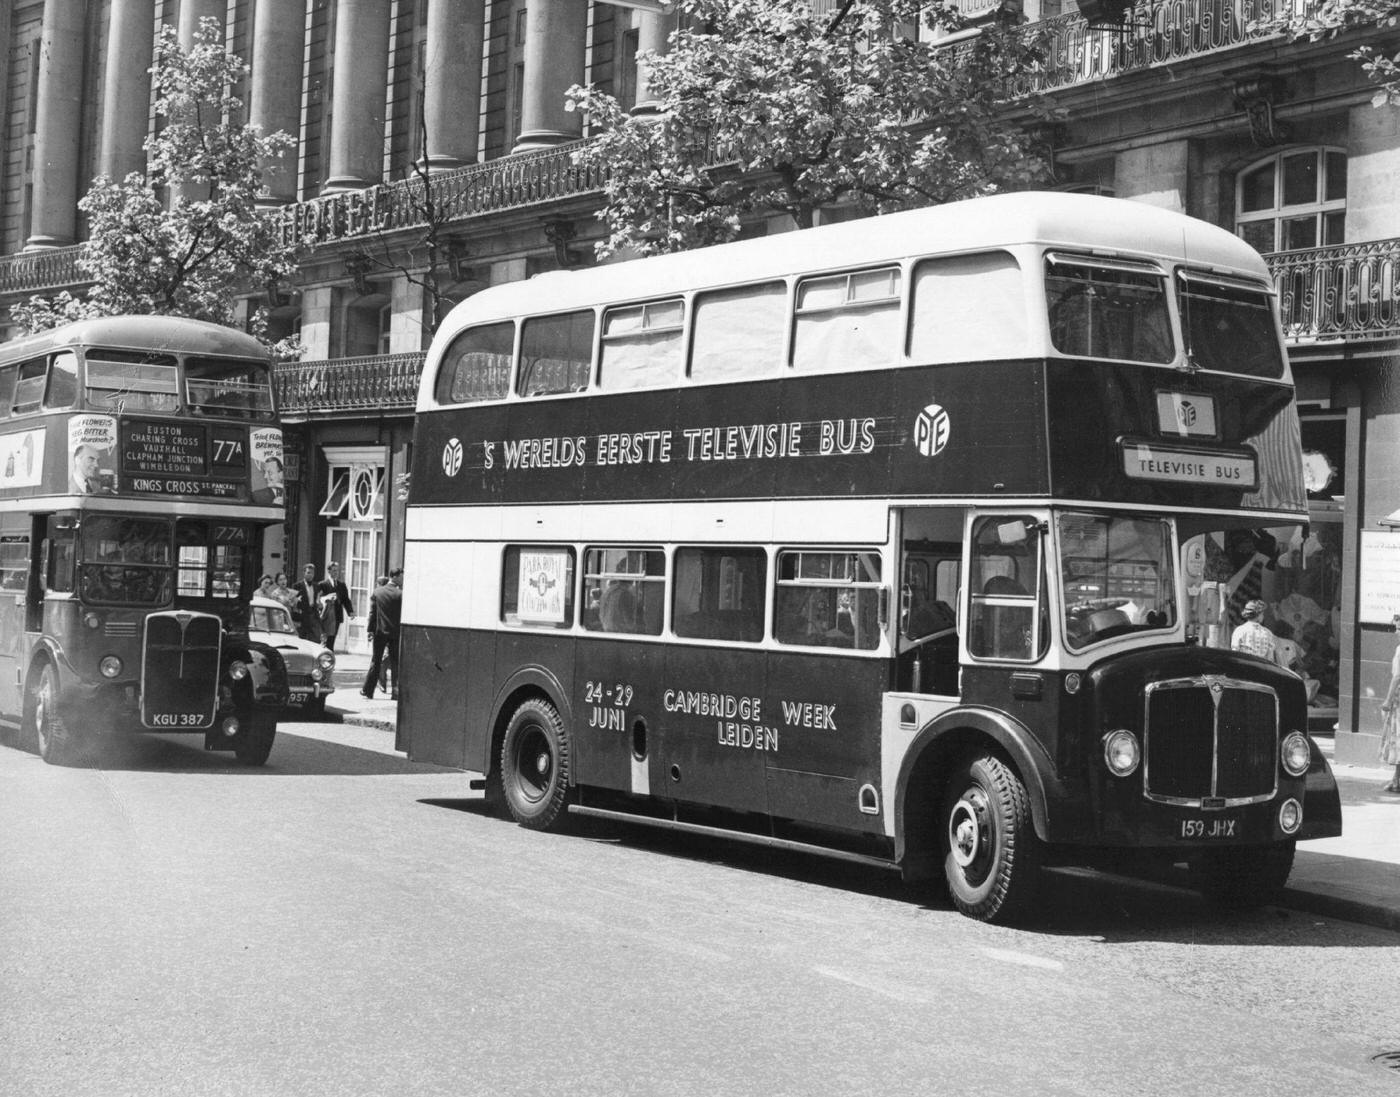 TV Bus travels through Aldwych, London, on its way to Leiden, Netherlands for the Cambridge Week festivities,1957.